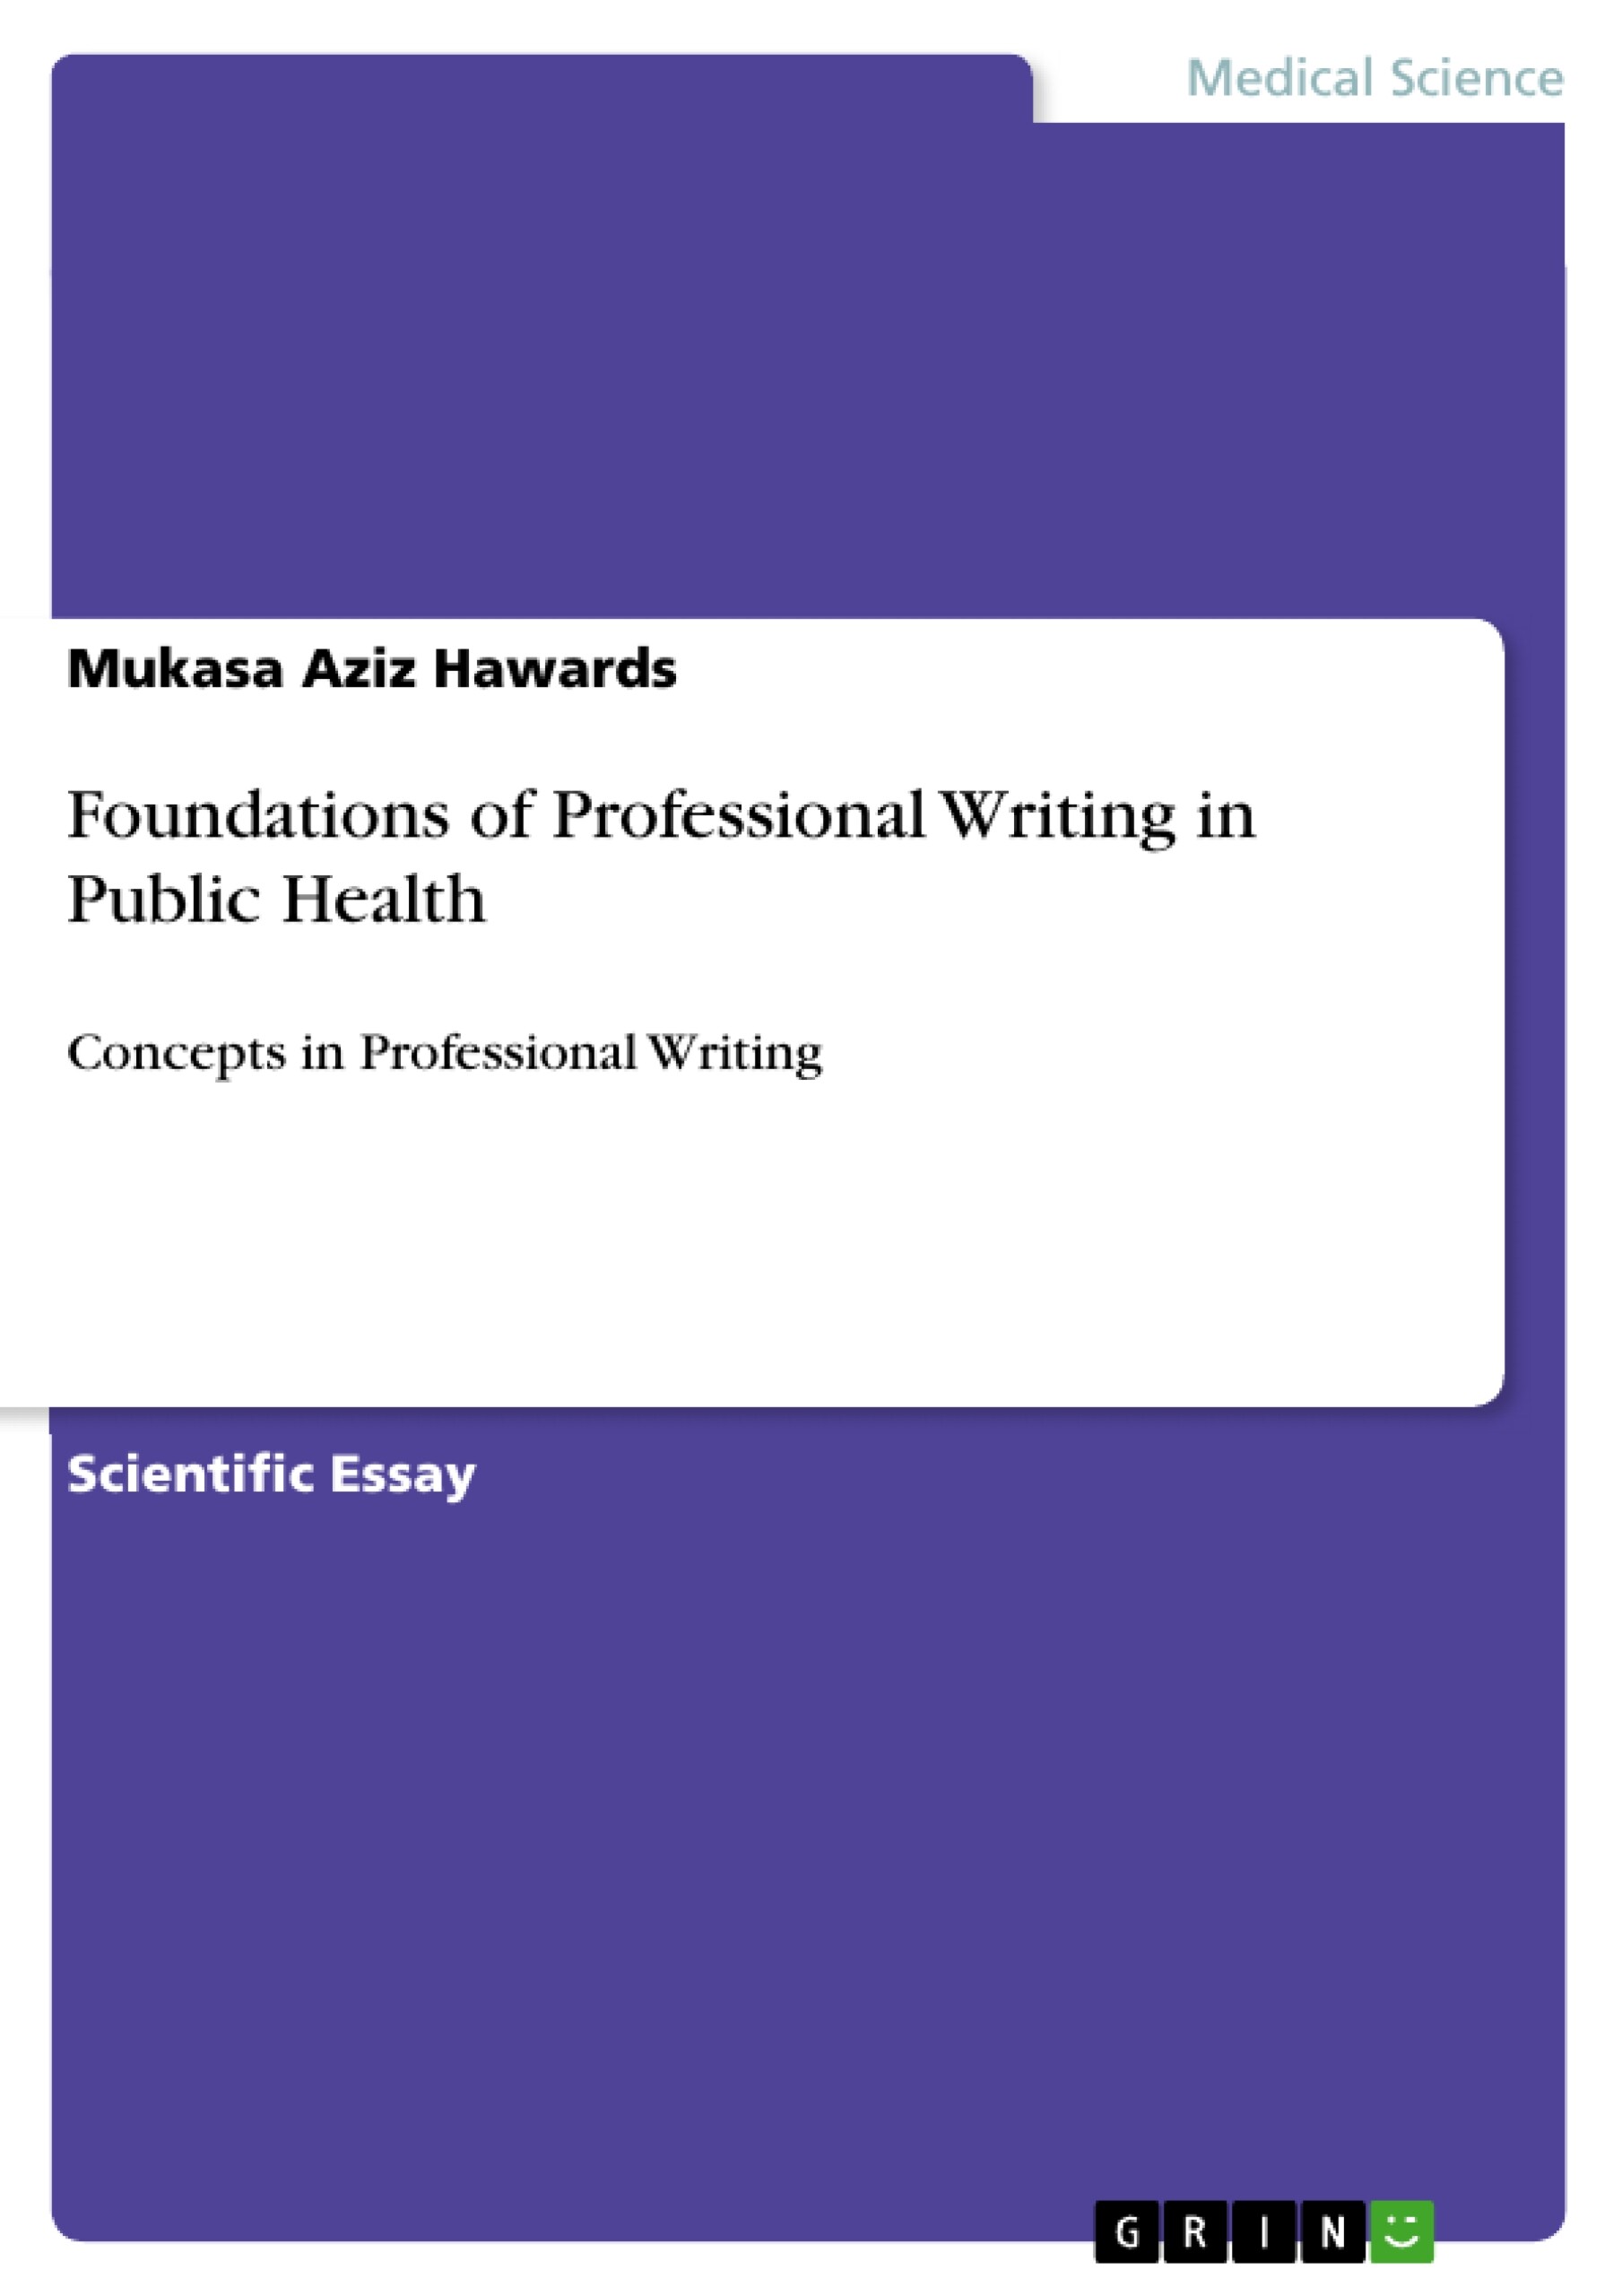 Foundations of Professional Writing in Public Health